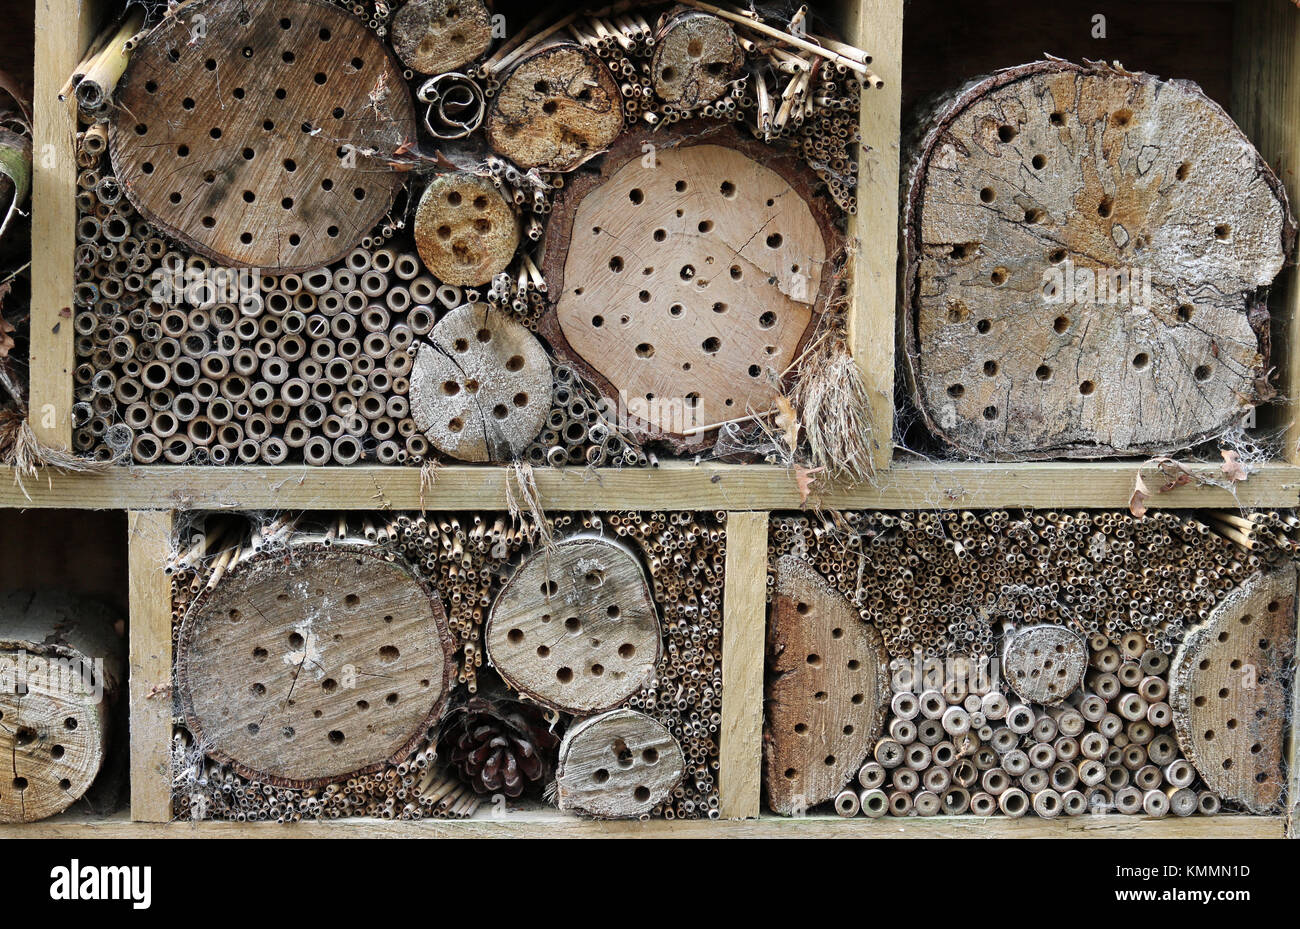 Bug hotel in a wooden frame for insects to breed and overwinter in with holes drilled in logs, grass stems, bamboo canes and conifer cones. Stock Photo